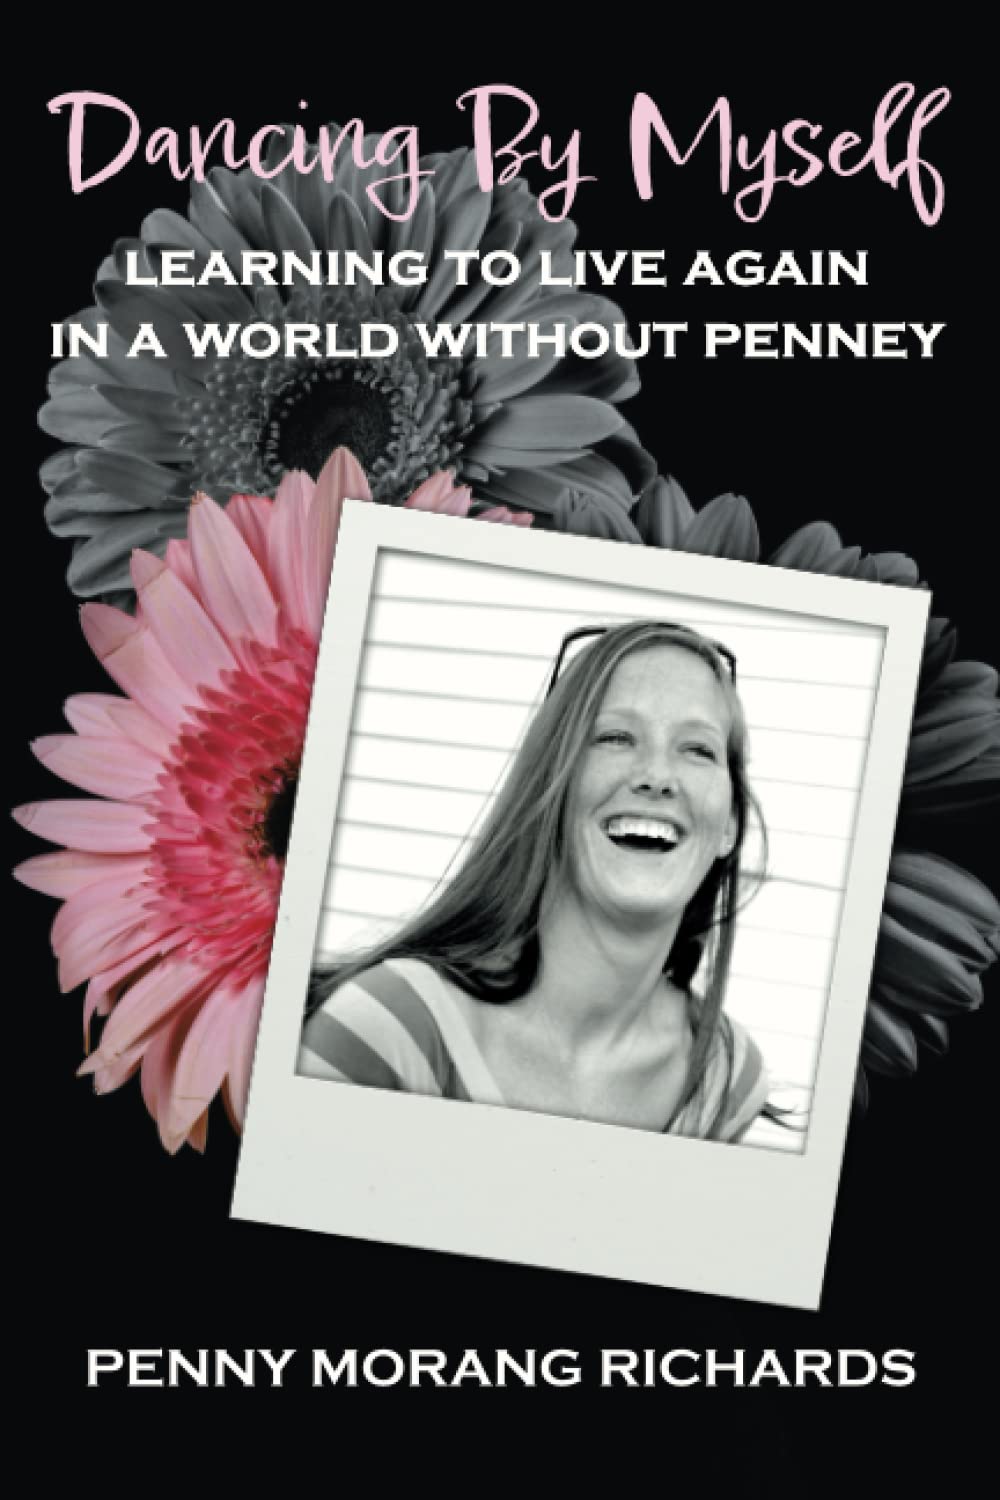 Dancing By Myself: Learning to Live Again In A World Without Penney by Penny Morang Richards